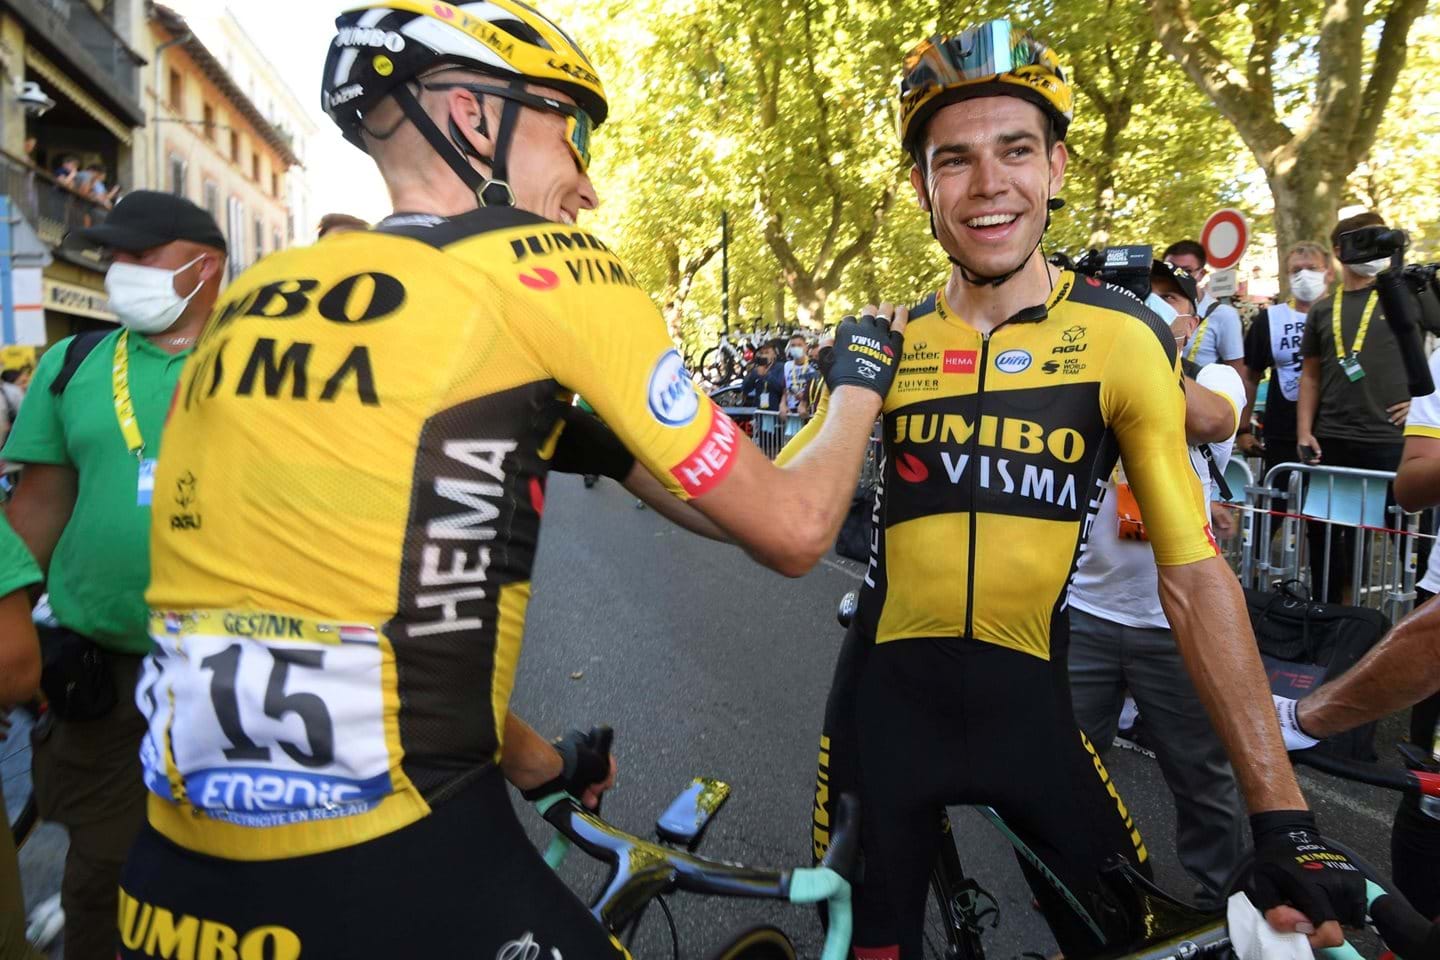 Wout van Aert receives congratulations from a teammate after his strong performance.